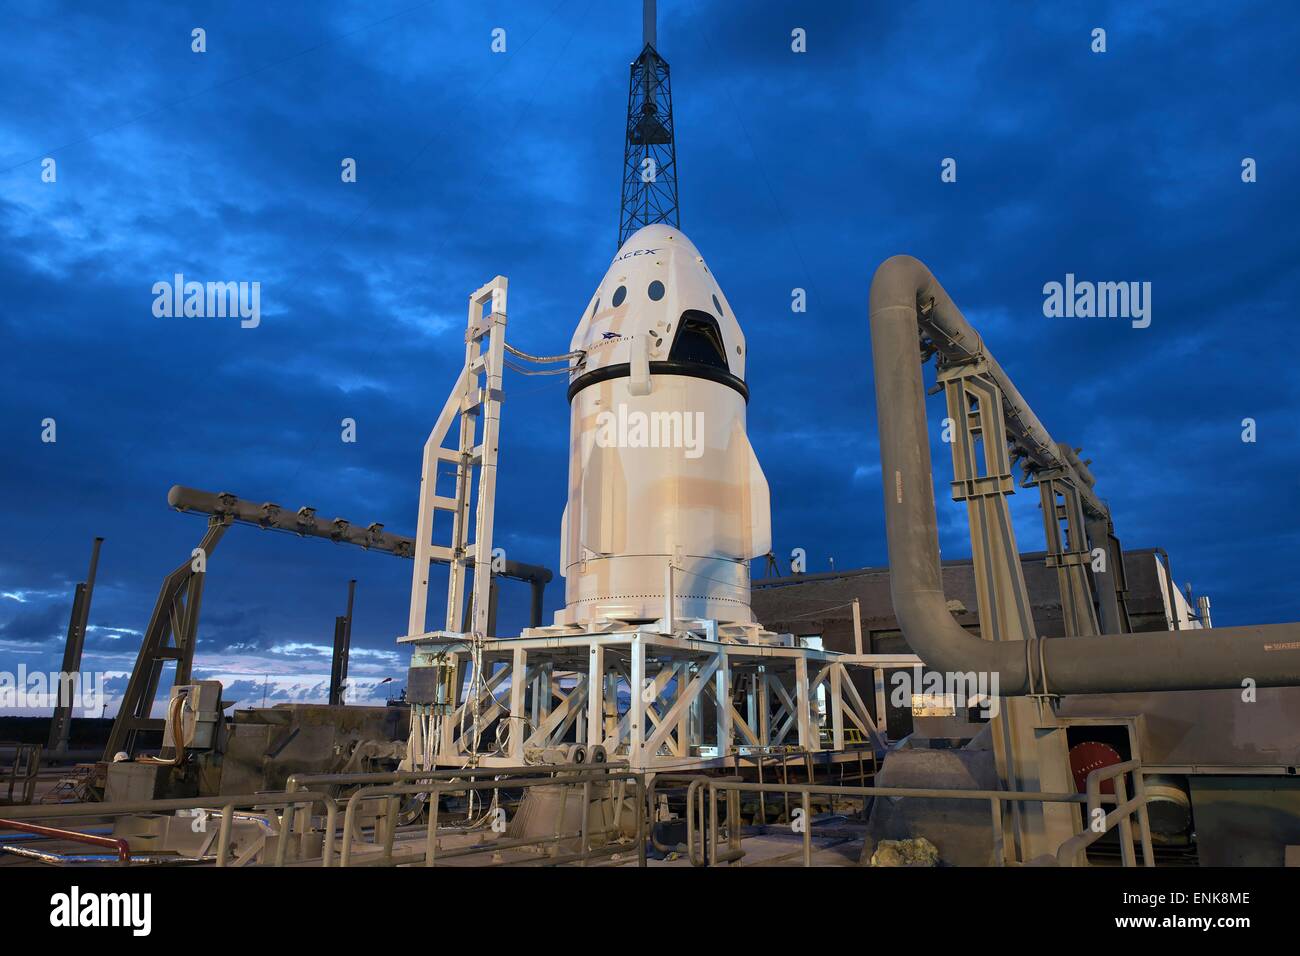 The SpaceX Dragon crew capsule spacecraft is readied for a test to simulate an emergency abort from the launch pad at Space Launch Complex 40 May 6, 2015 in Cape Canaveral, Florida. Stock Photo